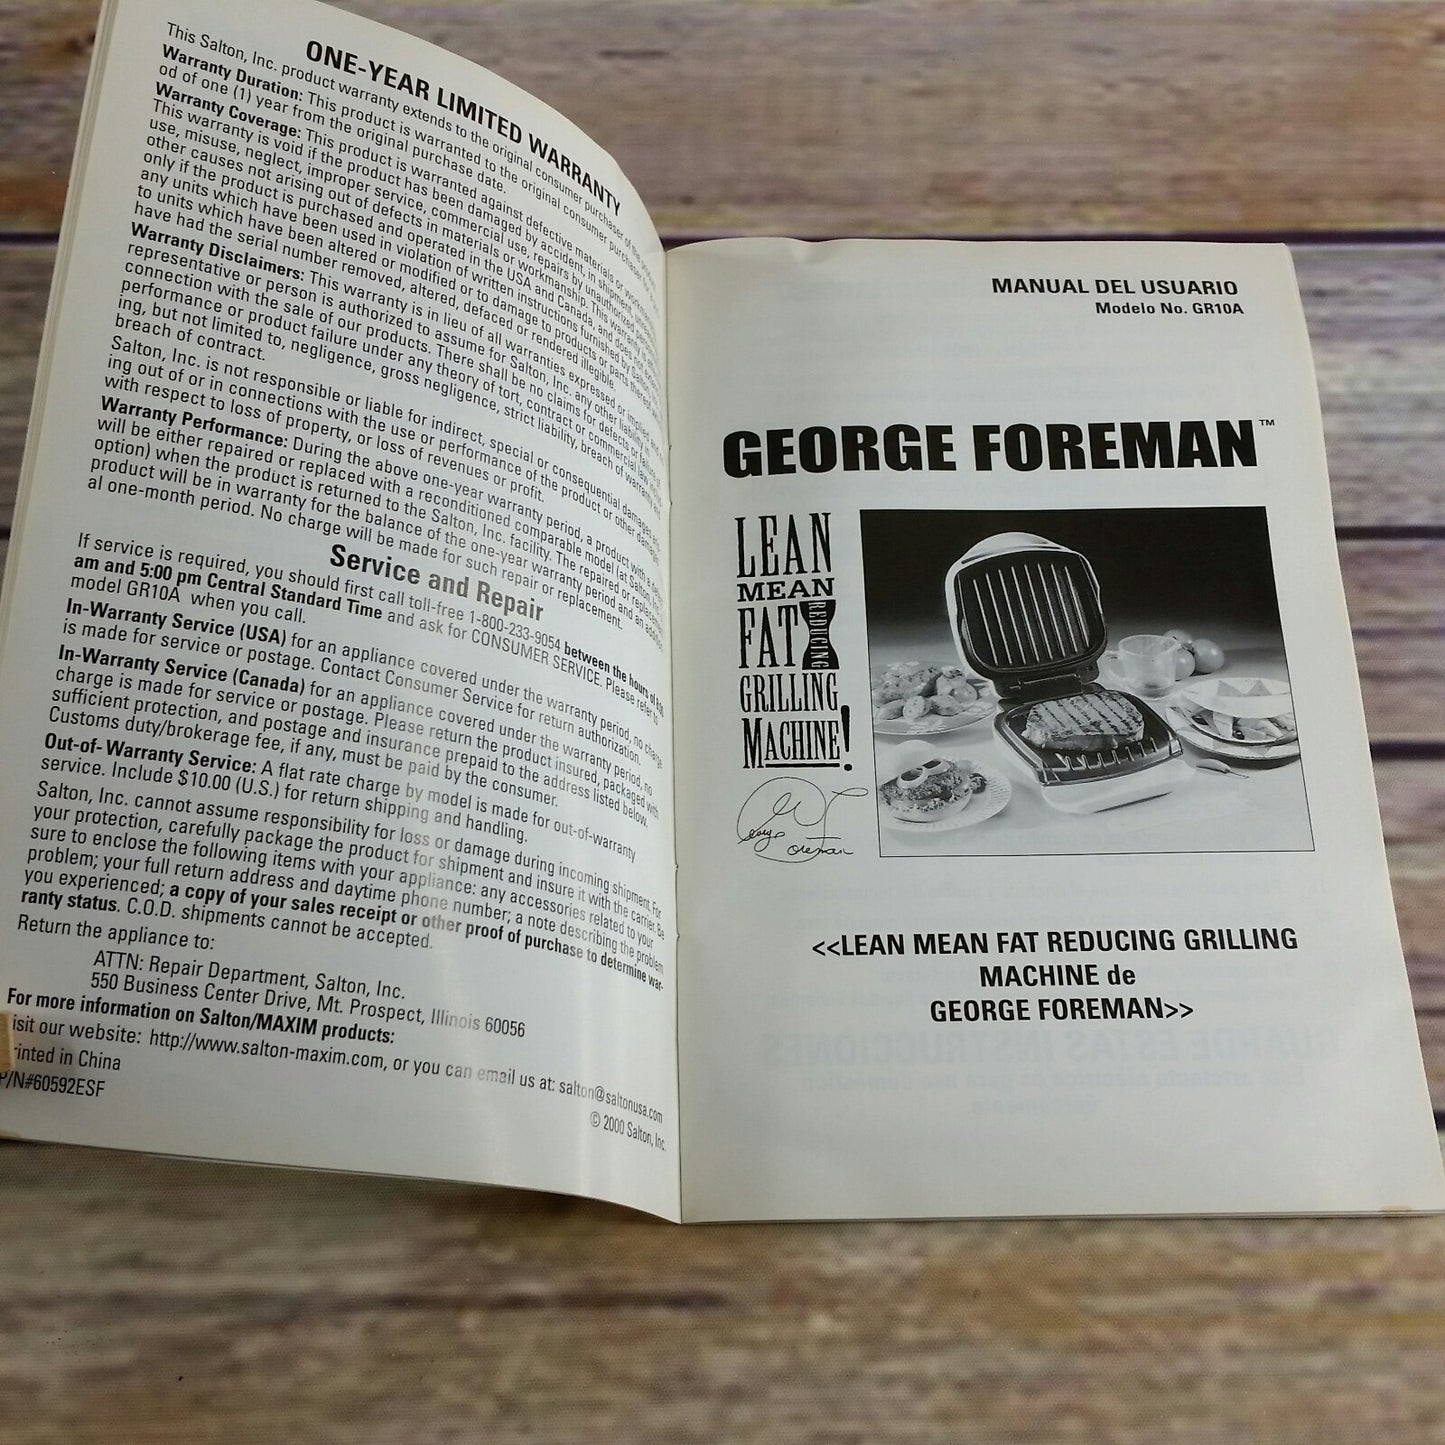 Vintage Cookbook George Foreman Instructions Recipes Manual Paperback Lean Mean Fat Reducing Grilling Machine Salton - At Grandma's Table